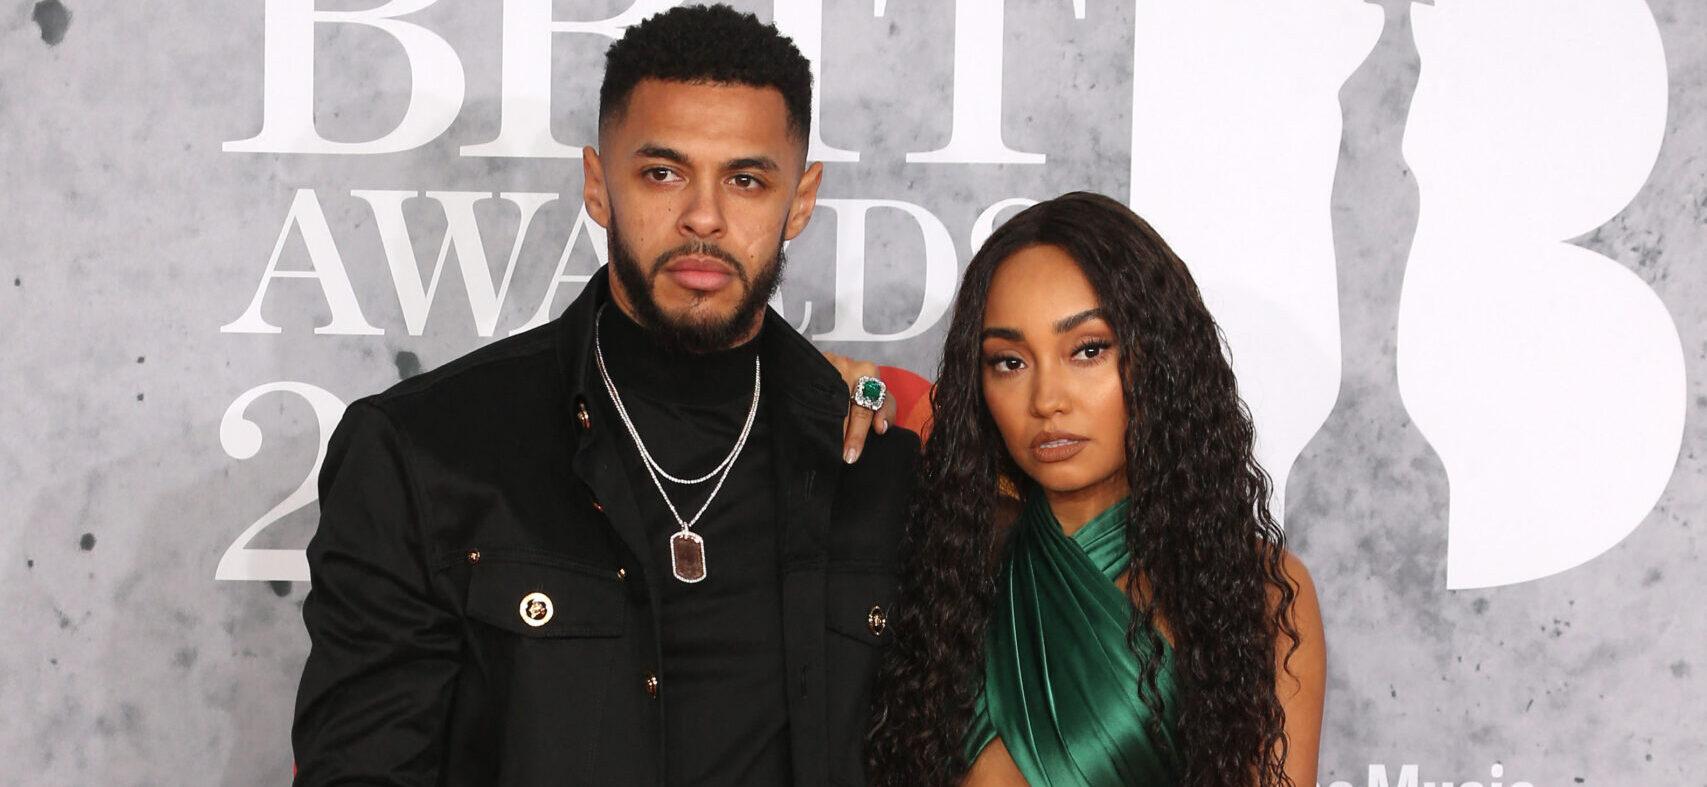 Little Mix’s Leigh-Anne Pinnock Ties The Knot With Her Footballer Beau Andre Gray